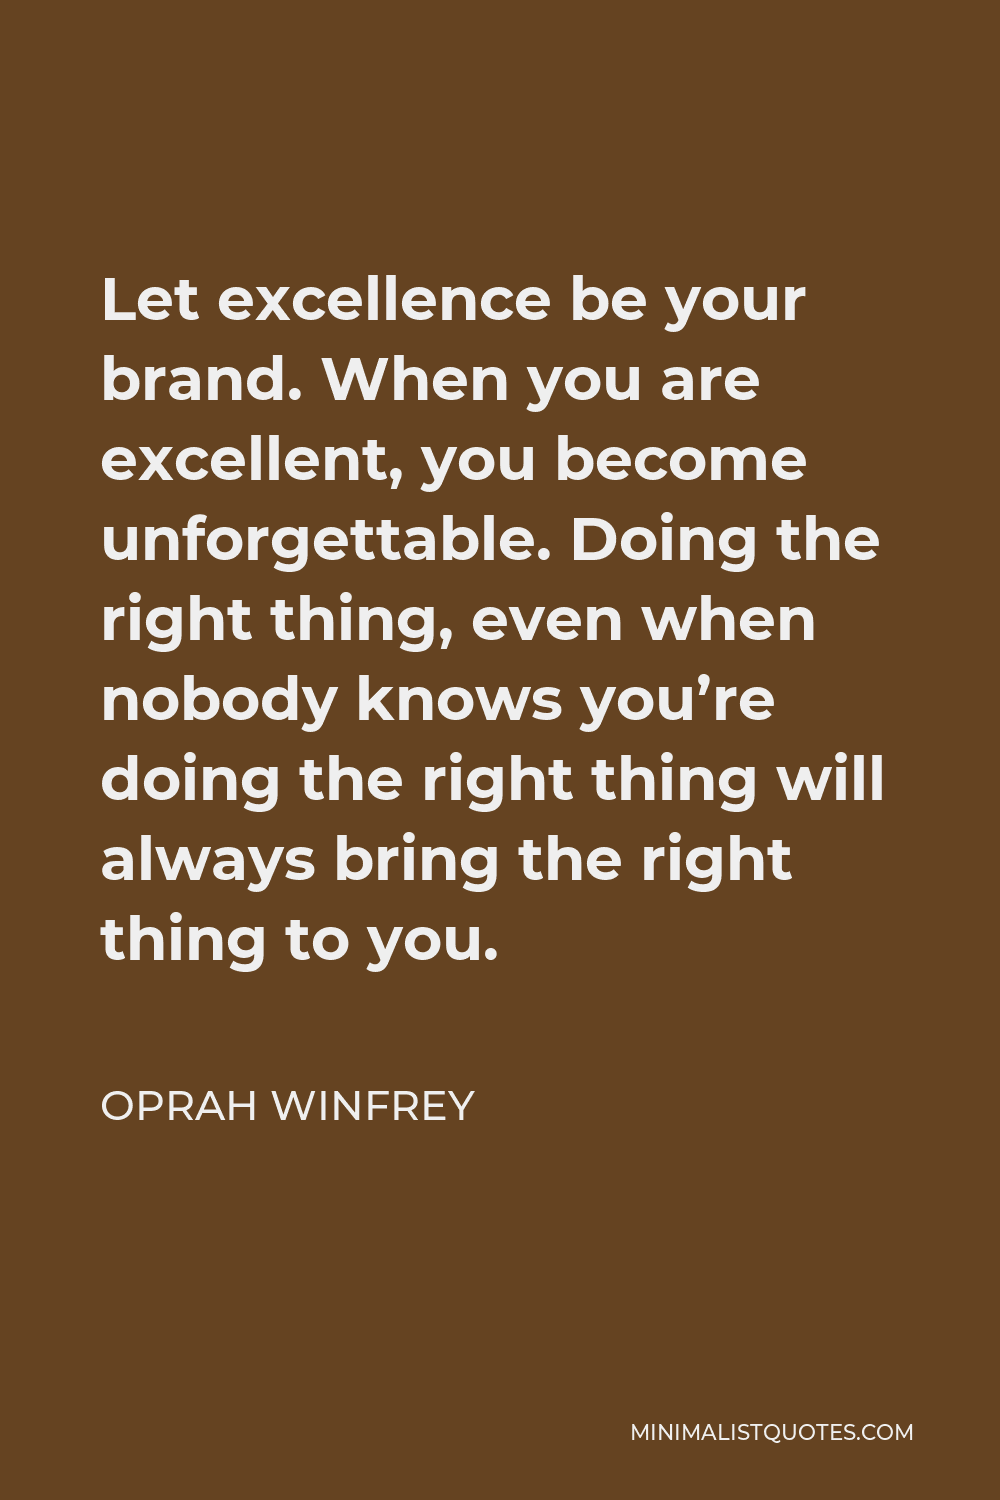 Oprah Winfrey Quote - Let excellence be your brand. When you are excellent, you become unforgettable. Doing the right thing, even when nobody knows you’re doing the right thing will always bring the right thing to you.